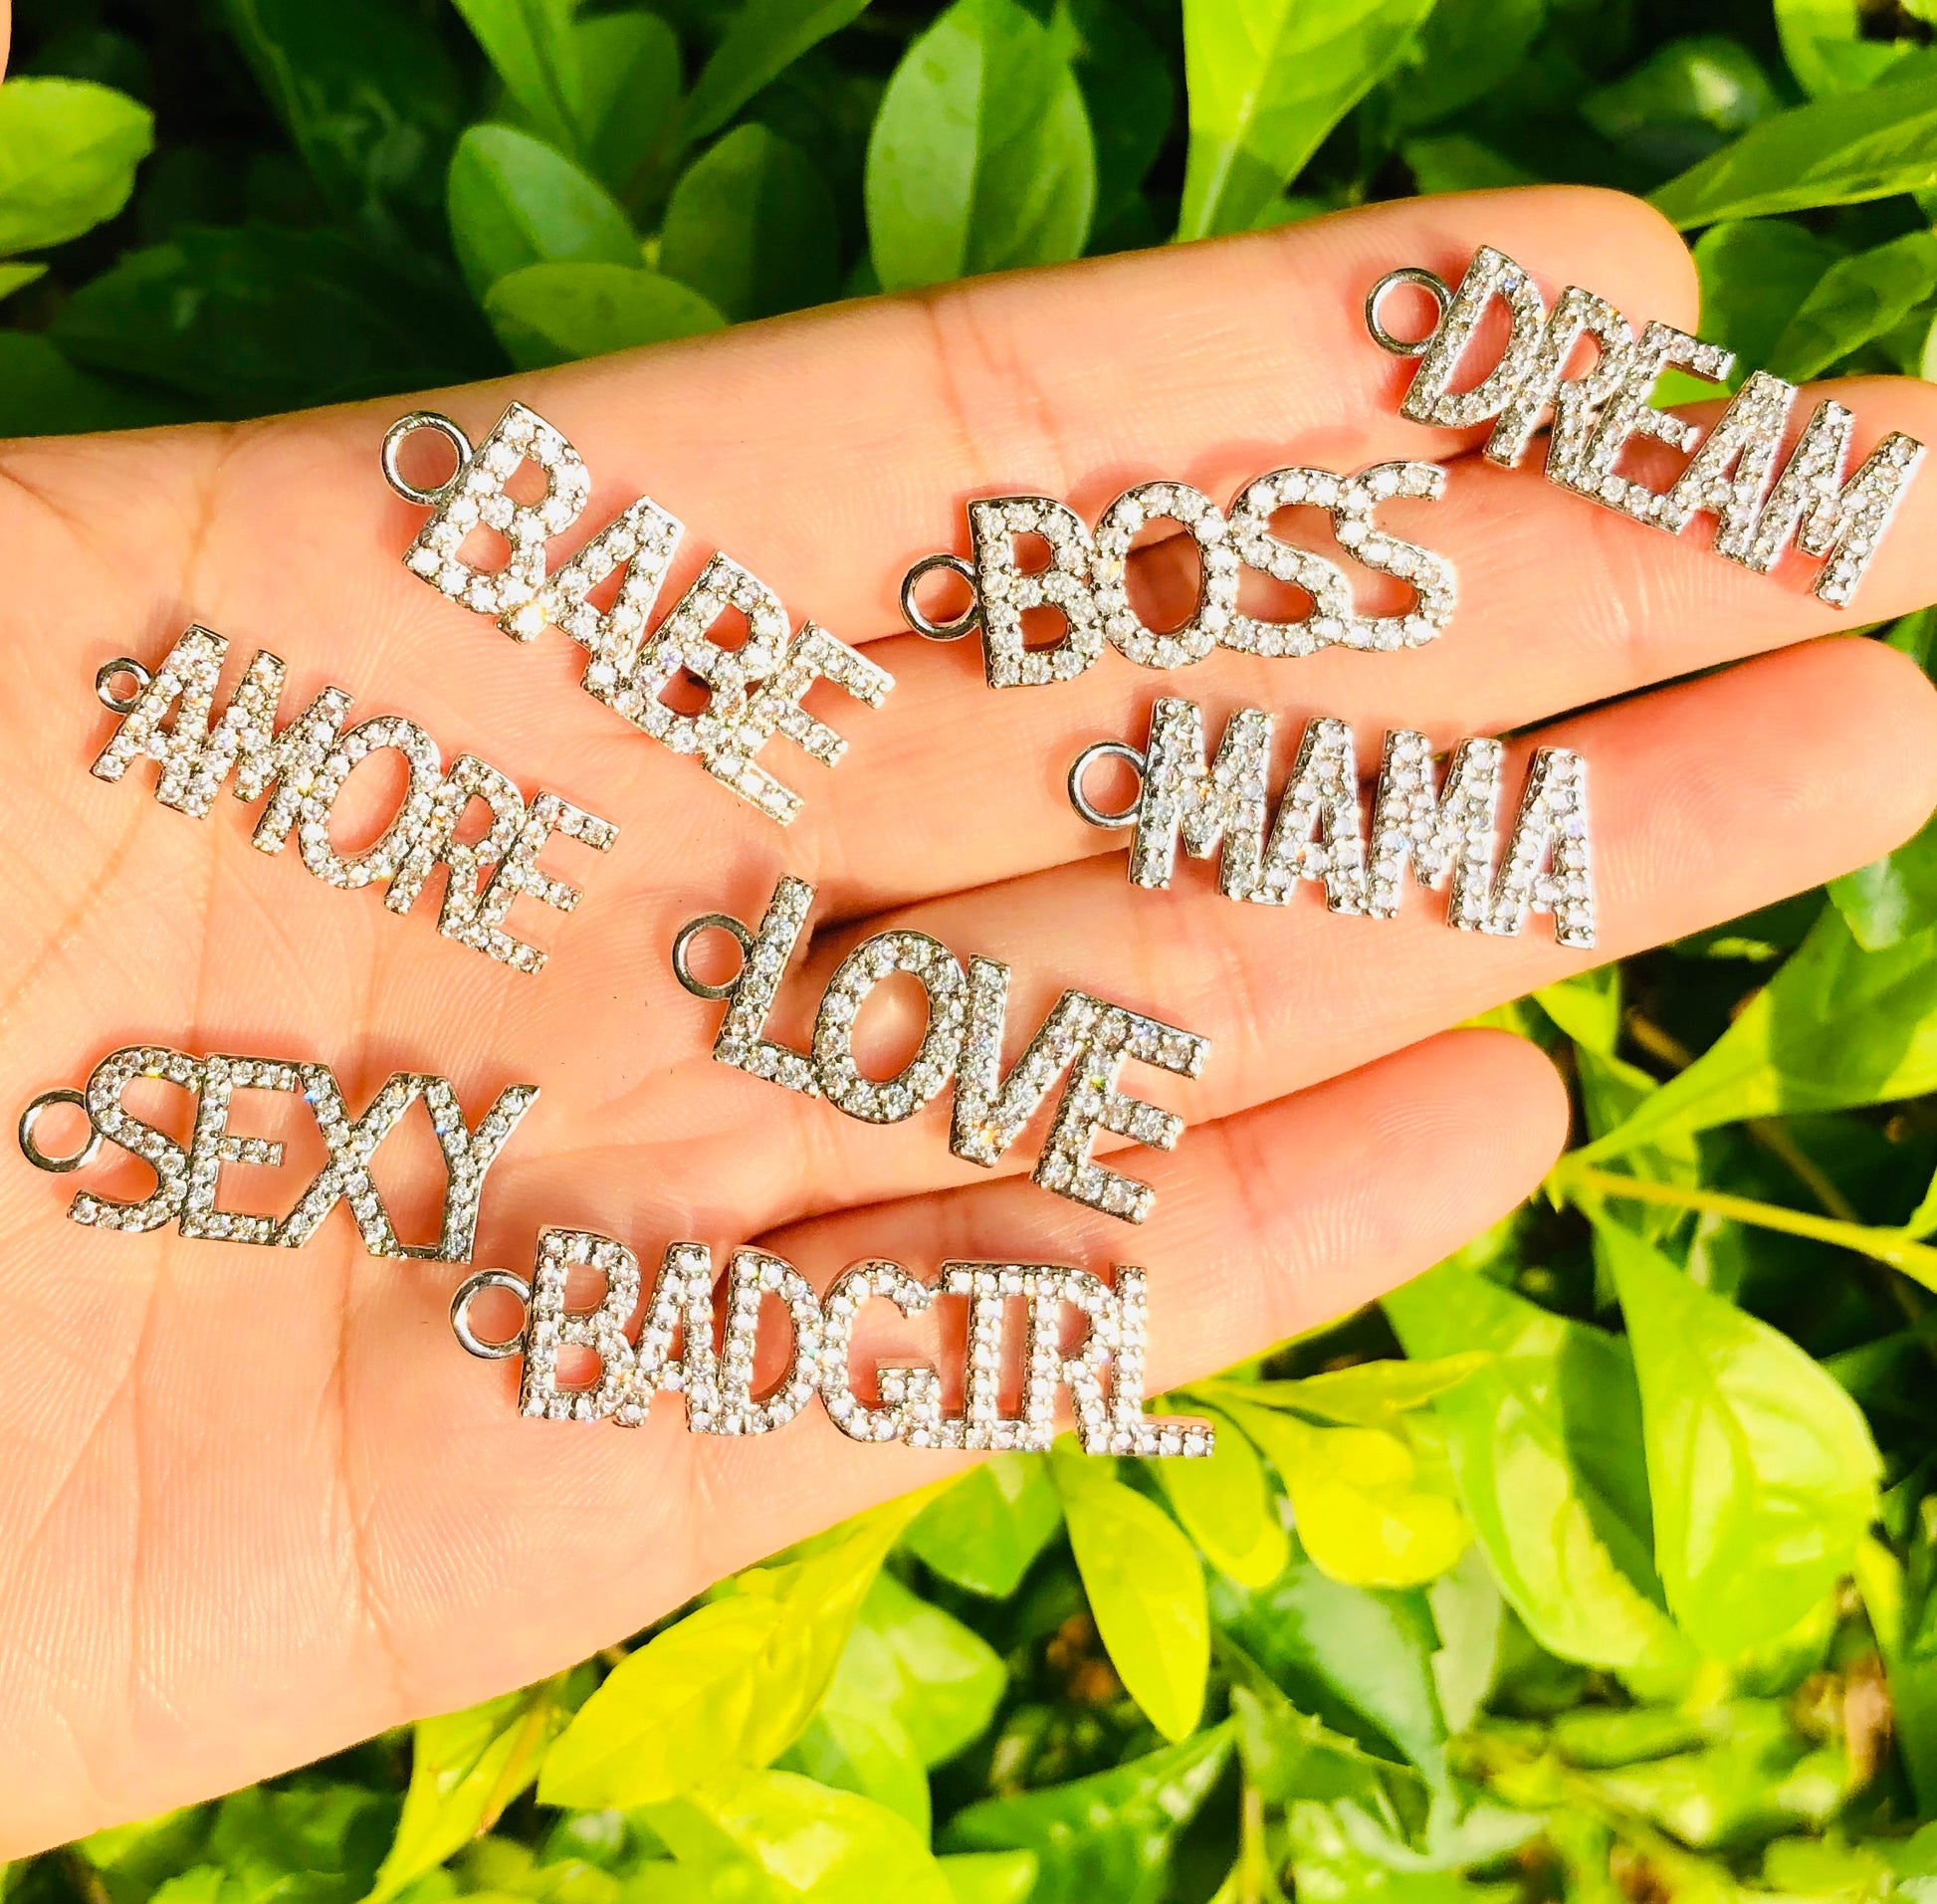 10pcs/lot Silver CZ Paved Letter Charms Mix Letters-10pcs CZ Paved Charms Love Letters Mother's Day Words & Quotes Charms Beads Beyond